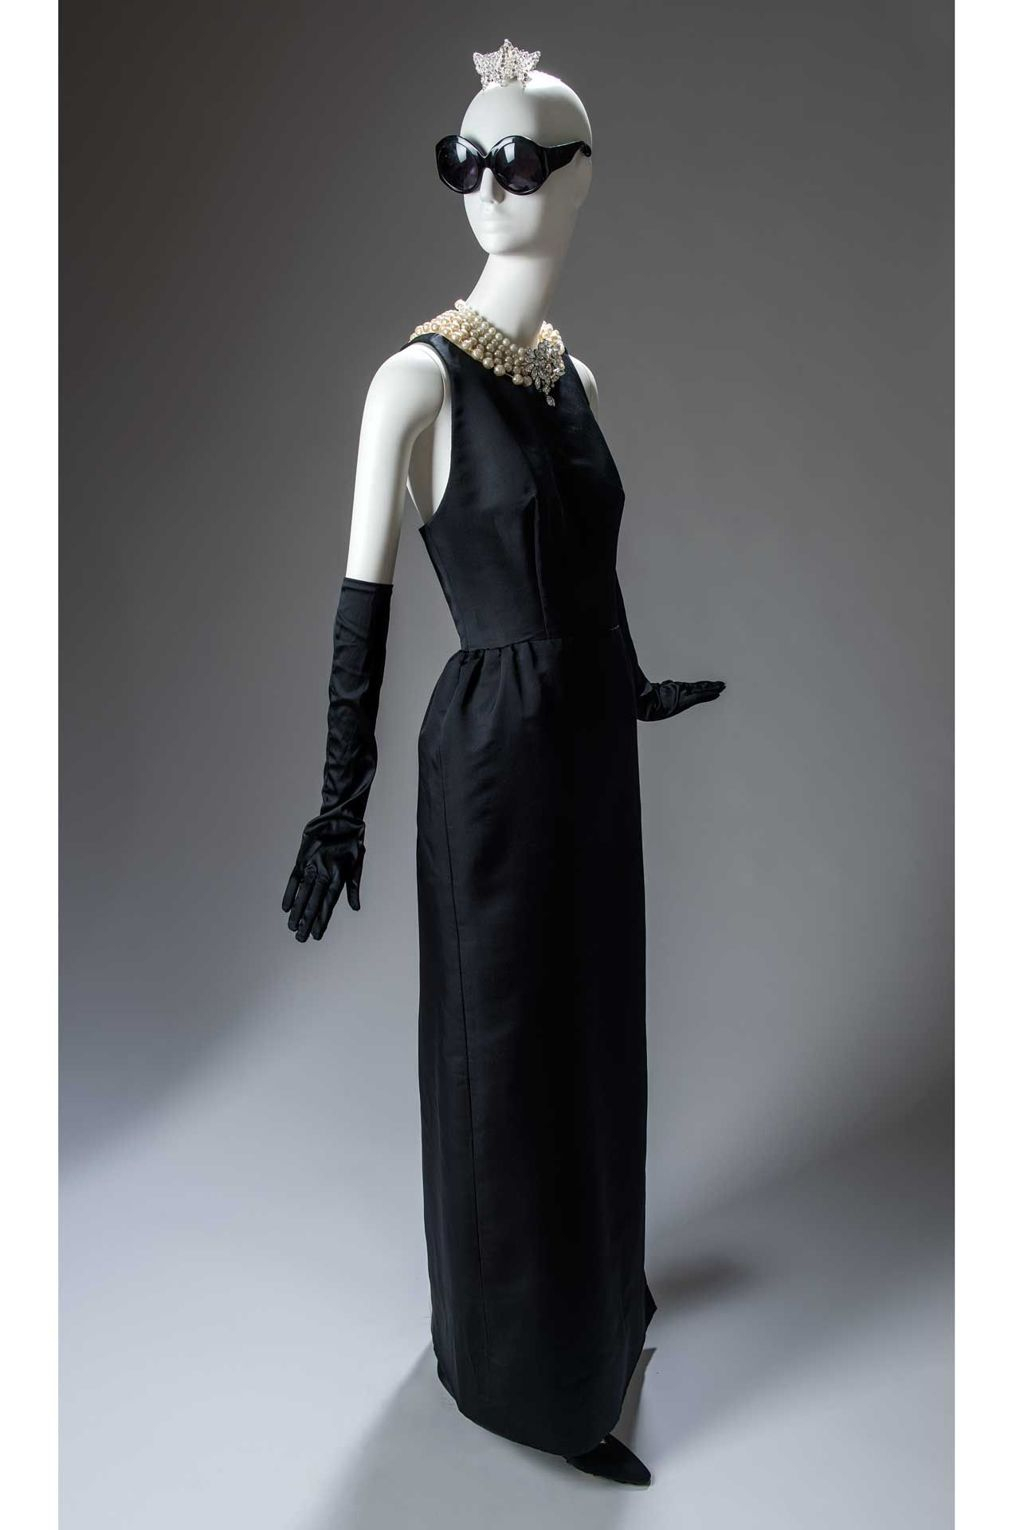 The Givenchy evening sheath dress worn by Holly Golightly, as played by Audrey Hepburn, in the opening scene of the Blake Edwards film, Breakfast at Tiffanys, 1961. Following its debut in the film, the black sheath has become an eternal element of the style lexicon (Photo: Luc Castel, Givenchy)